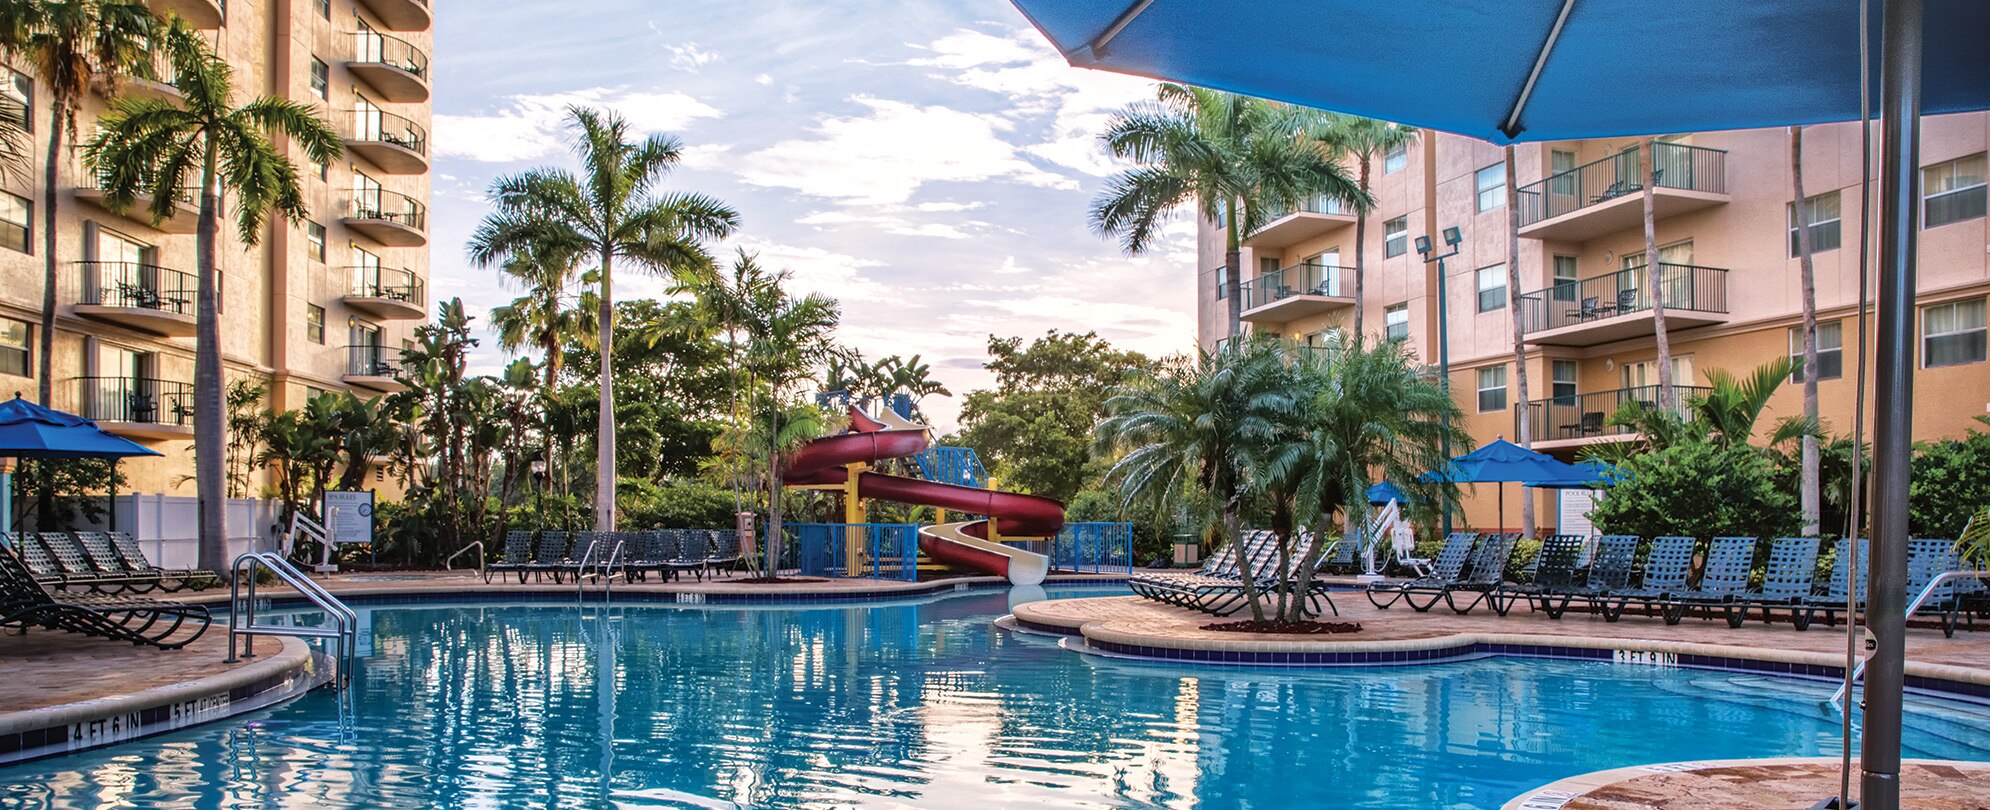 A pool surrounded by chairs and palm trees at WorldMark Palm-Air.